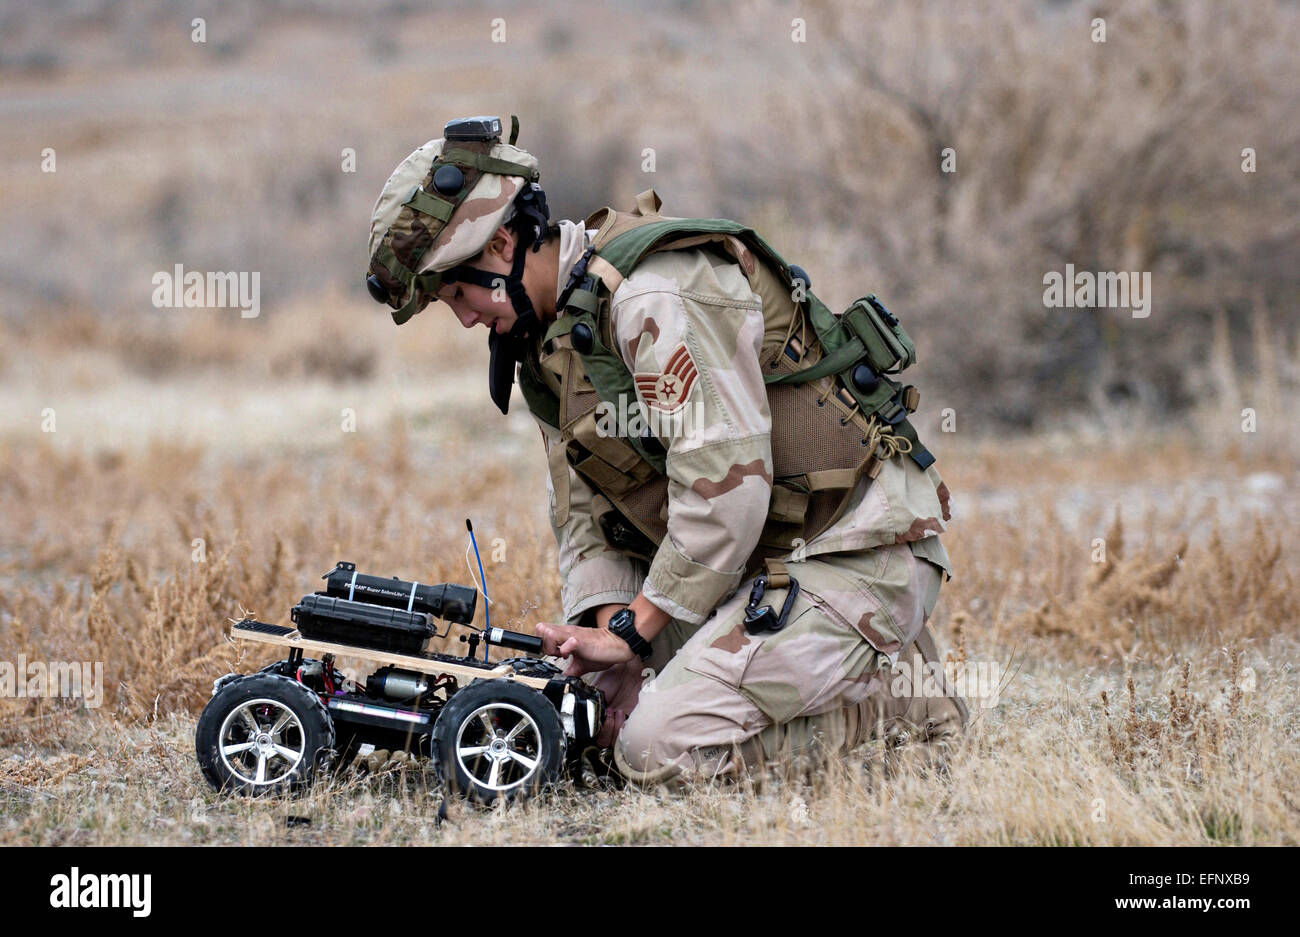 US Air Force Staff Sgt. Lilly Smith attaches C-4 explosive to the front of a remote controlled vehicle used by explosive ordnance disposal personnel to detonate roadside improvised explosive devices during training at Hill Air Force Base November 10, 2004 in Ogden, Utah. Stock Photo